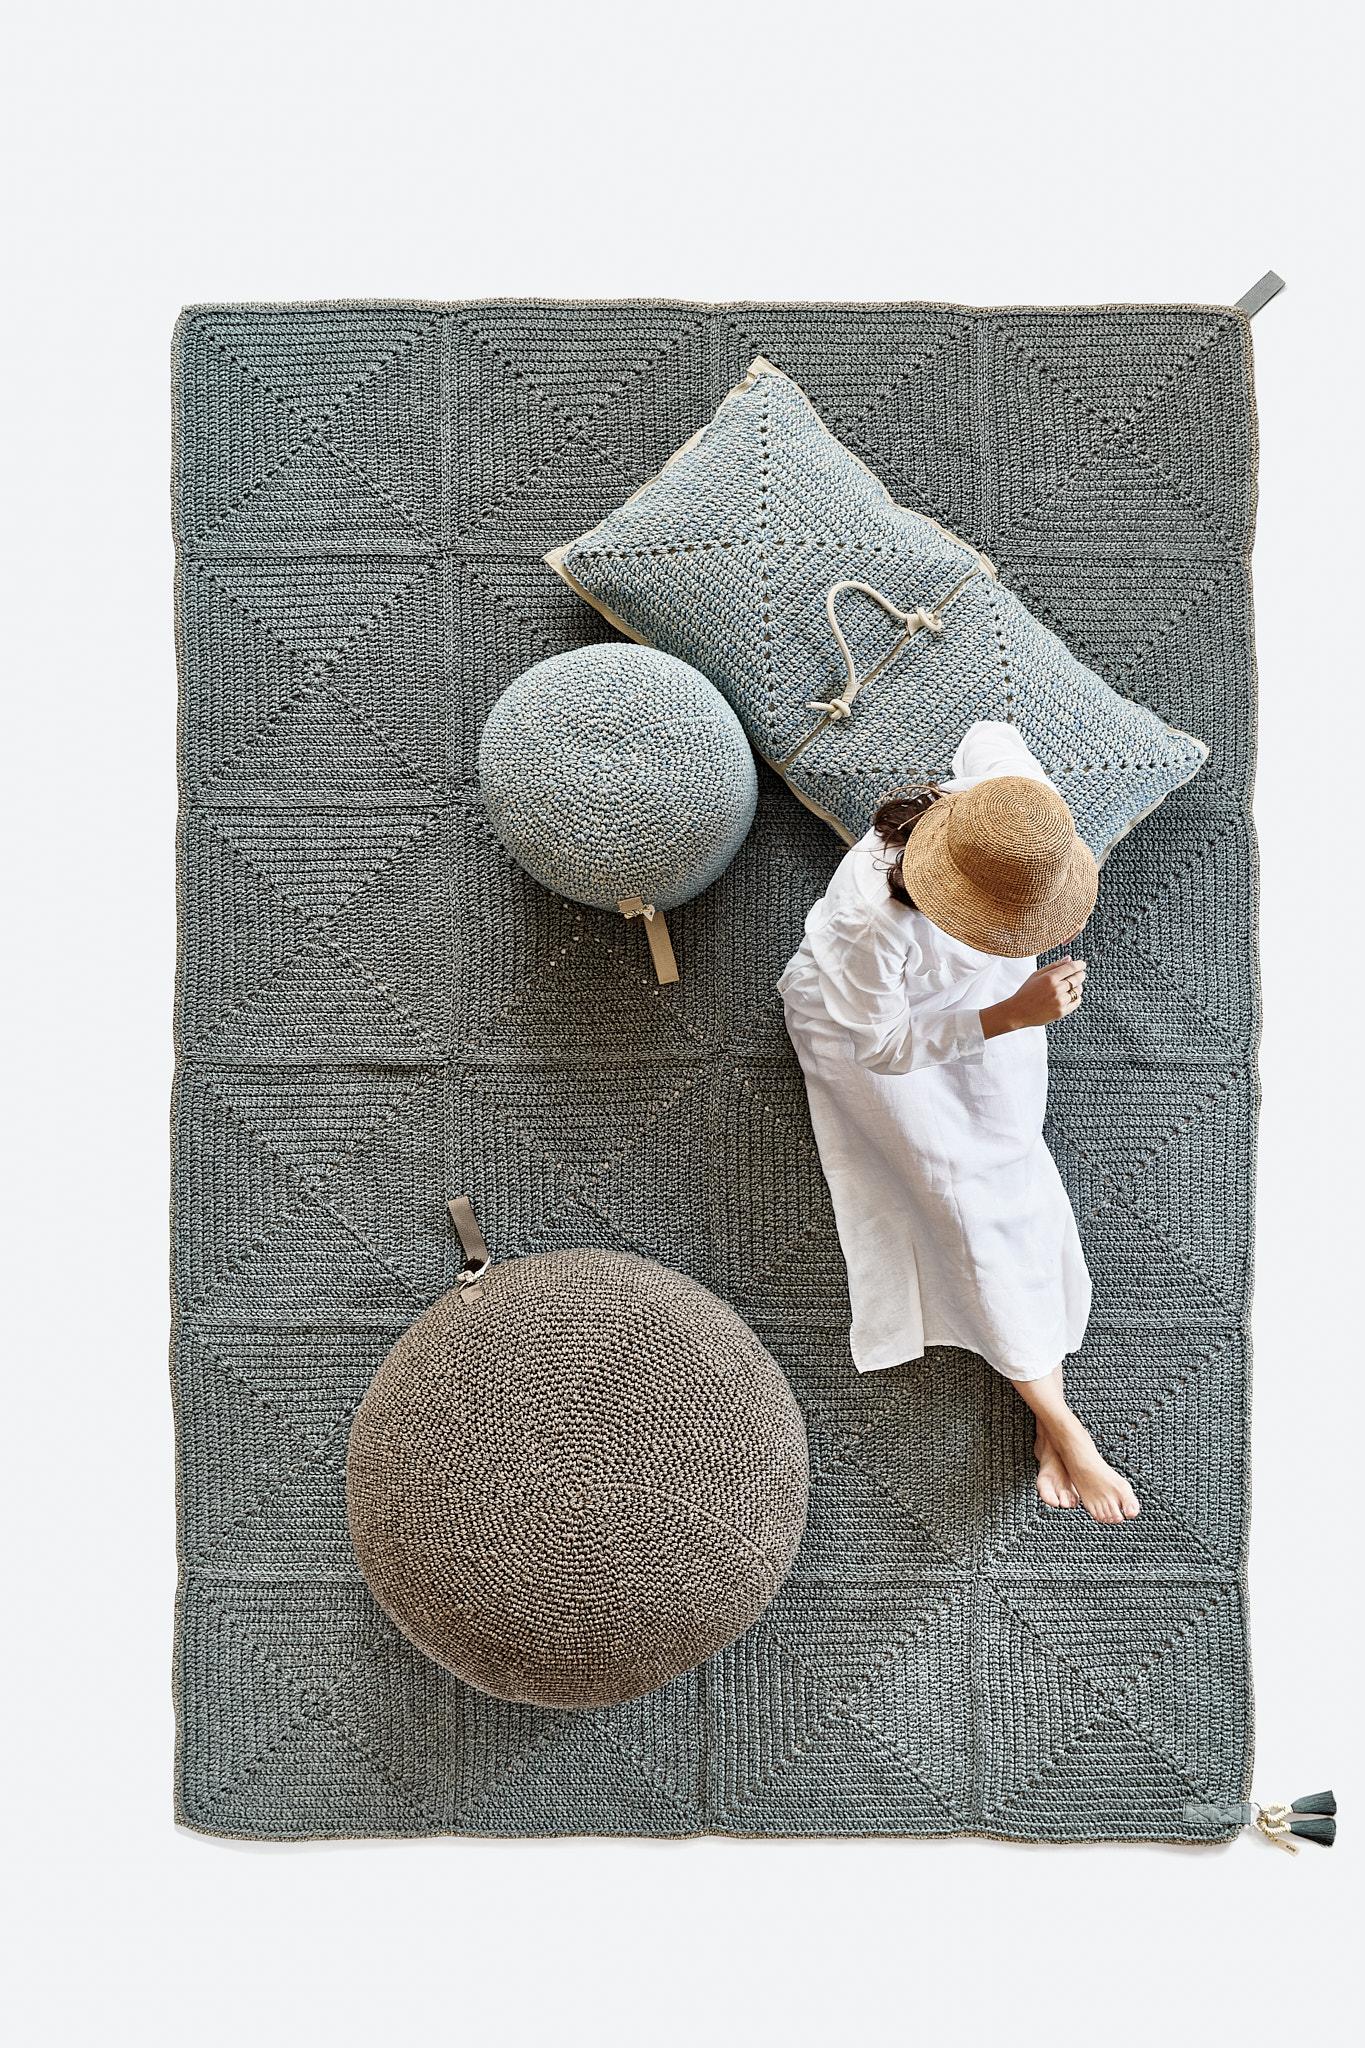 The Classic crochet granny square takes a contemporary twist in this outdoor rug. Large squares form the rug, framed with bespoke webbing. Handmade from UV protected bespoke iota yarn in earth tones, the textile is soft, yet durable and suitable for